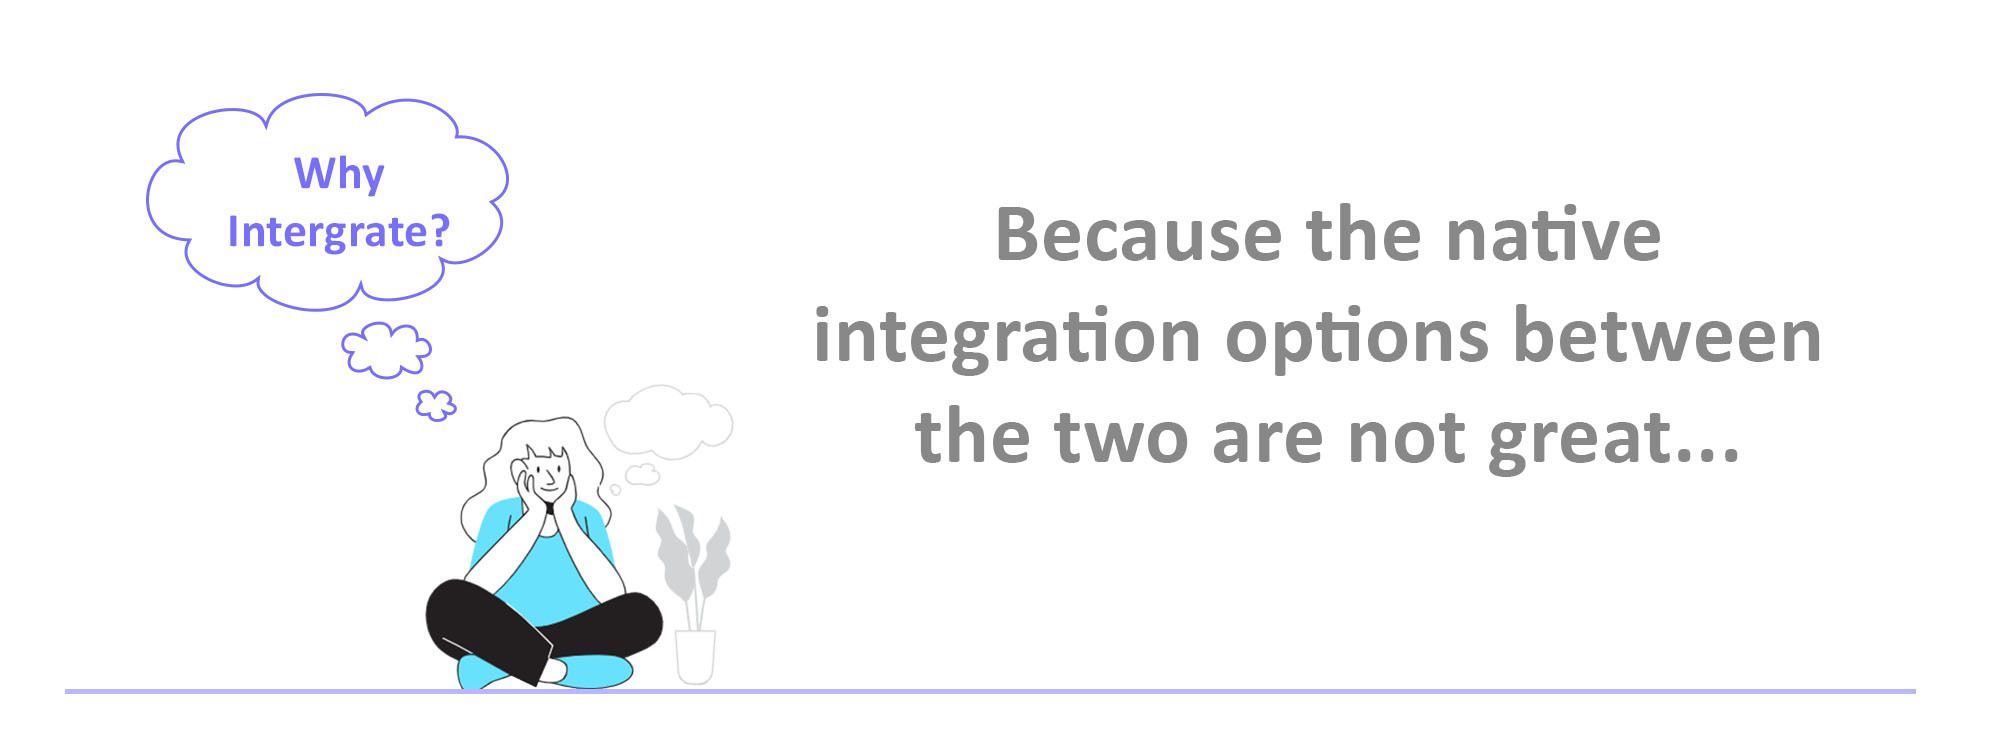 Native integration options for connecting HubSpot & OneDrive are not great